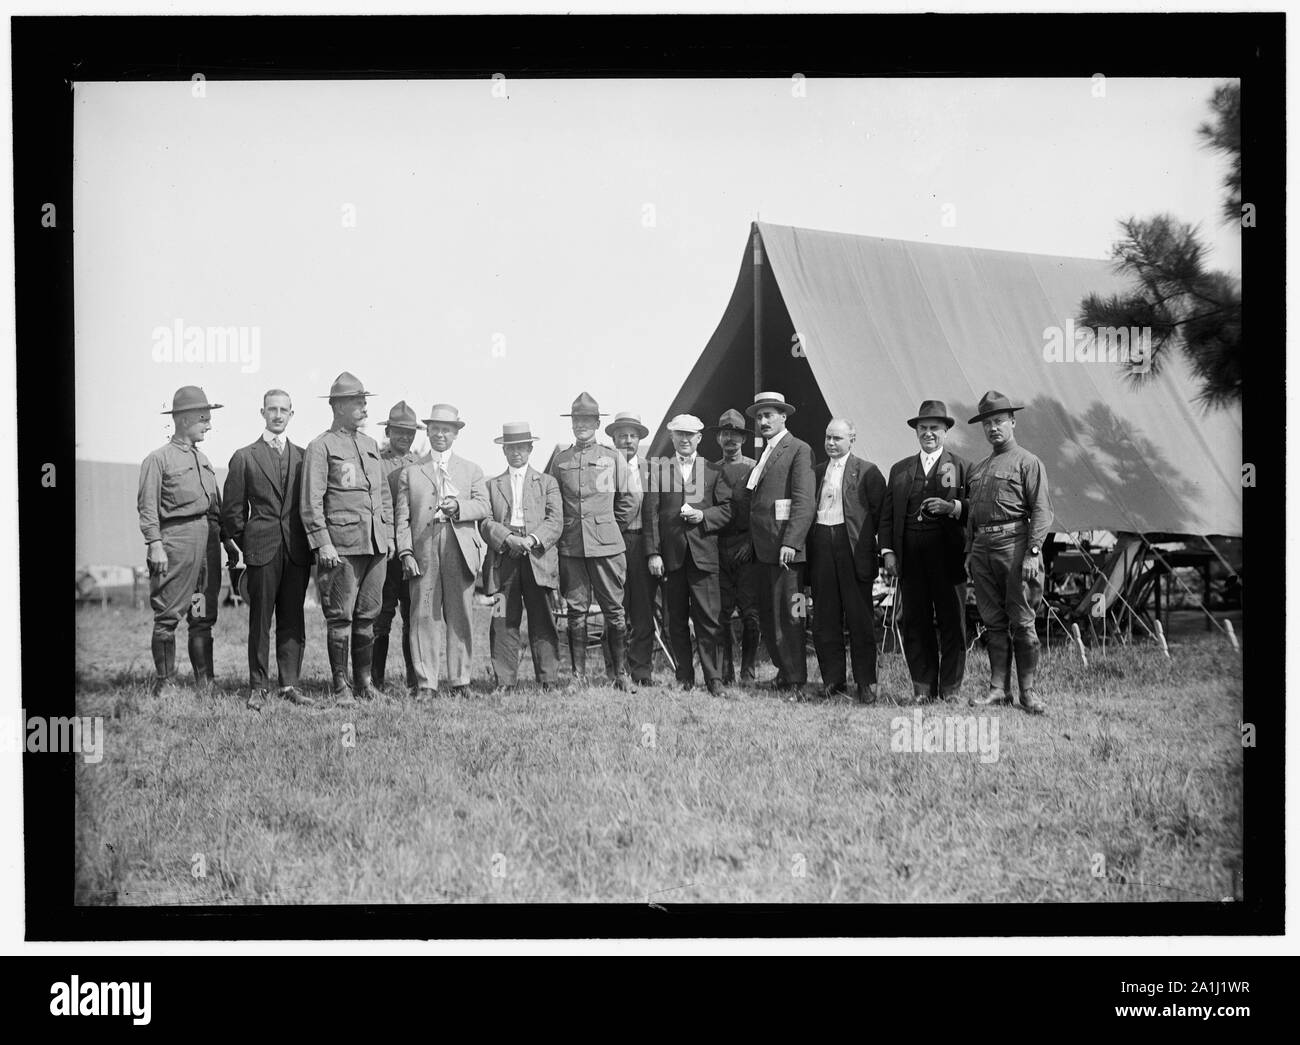 NATIONAL GUARD OF D.C. M. AND M. ASSN. OF D.C. ON VISIT TO D.C.N.G. IN CAMP AT COLONIAL BEACH. FRONT: BOB FEATHERSTONE; UNIDENTIFIED; COL. WILLIAM E. HARVEY; ROSS P. ANDREWS; UNIDENTIFIED; ANTON STEPHAN; C.J. COLUMBUS; RICHARD L. LAMB; M.A. LEASE; UNIDENTIFIED; HARRY COOPE. 3 IN REAR UNIDENTIFIED Stock Photo